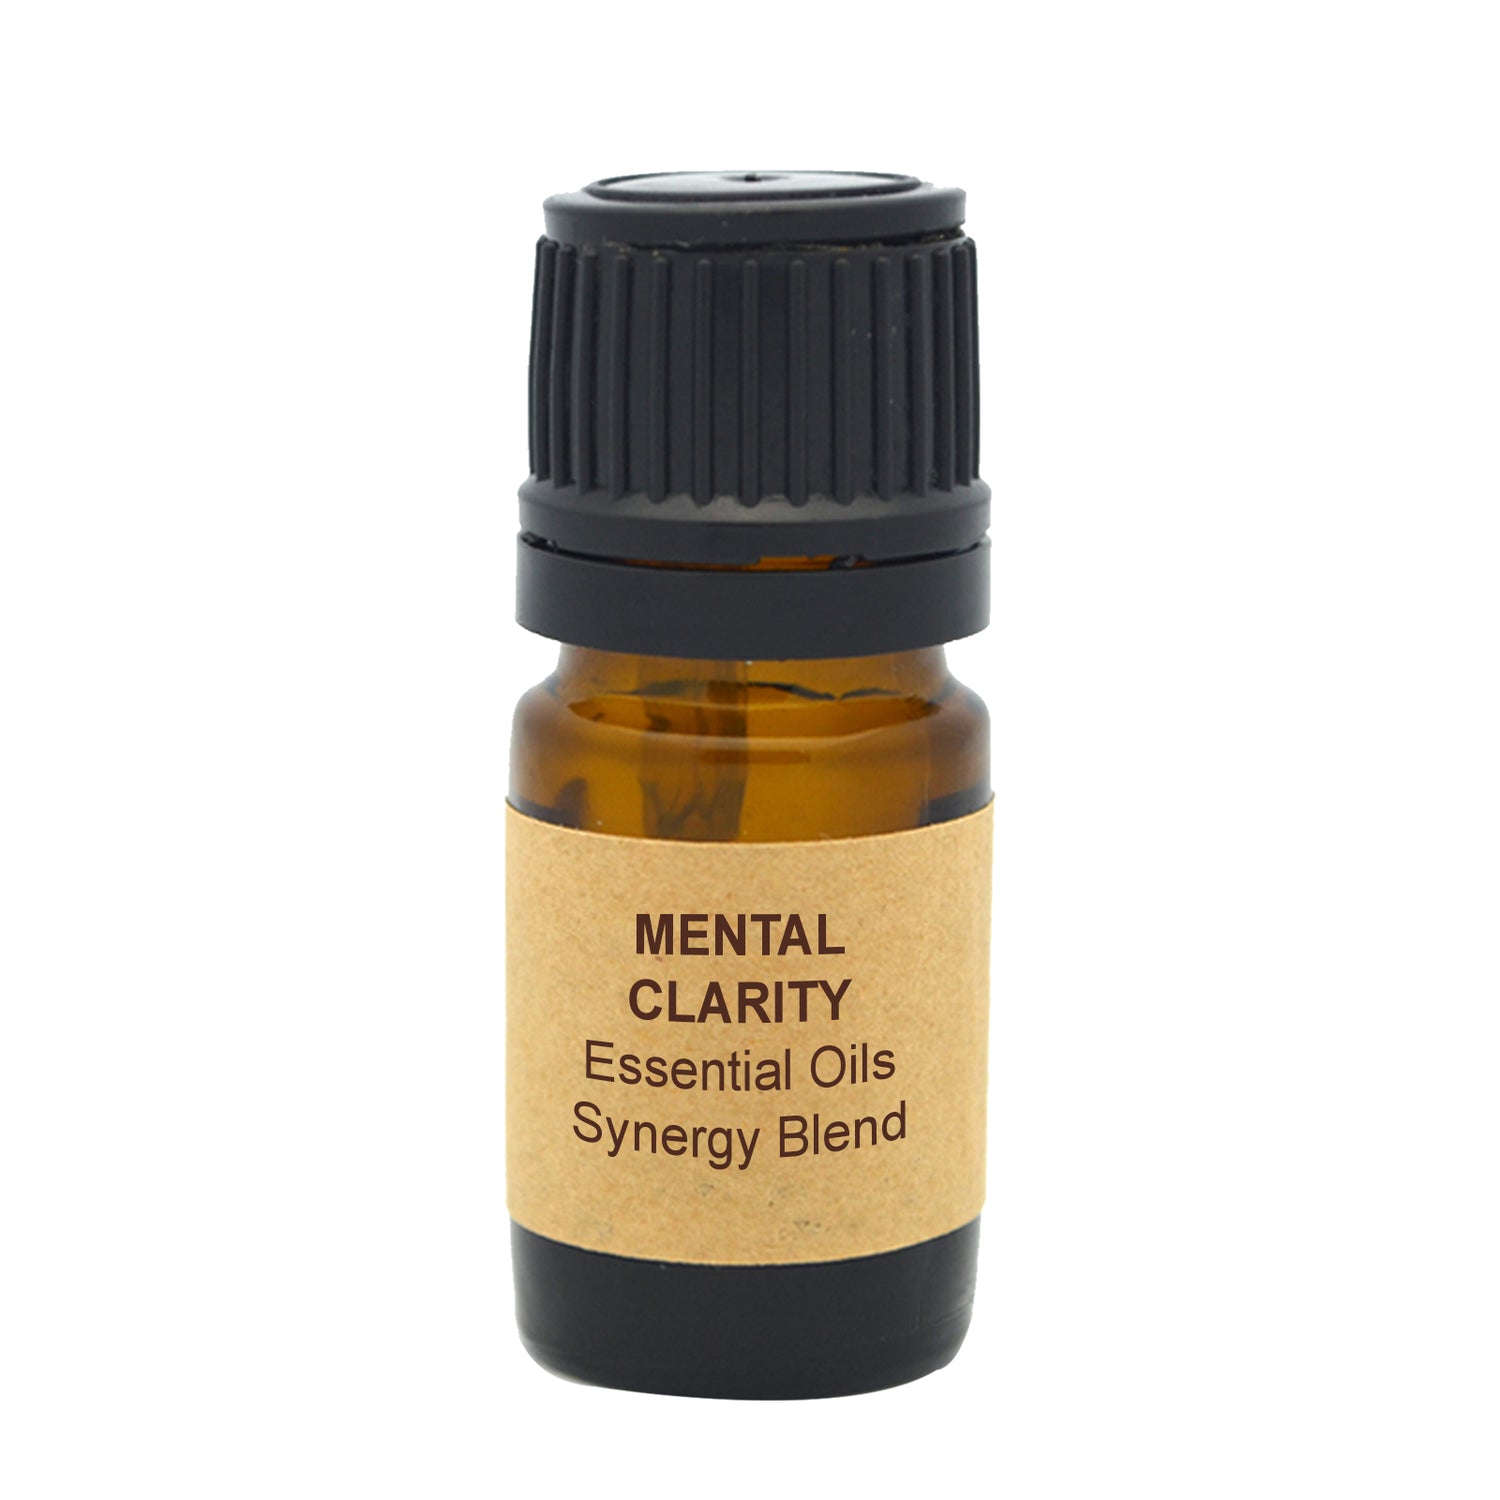 Mental Clarity Essential Oils Synergy Blend.